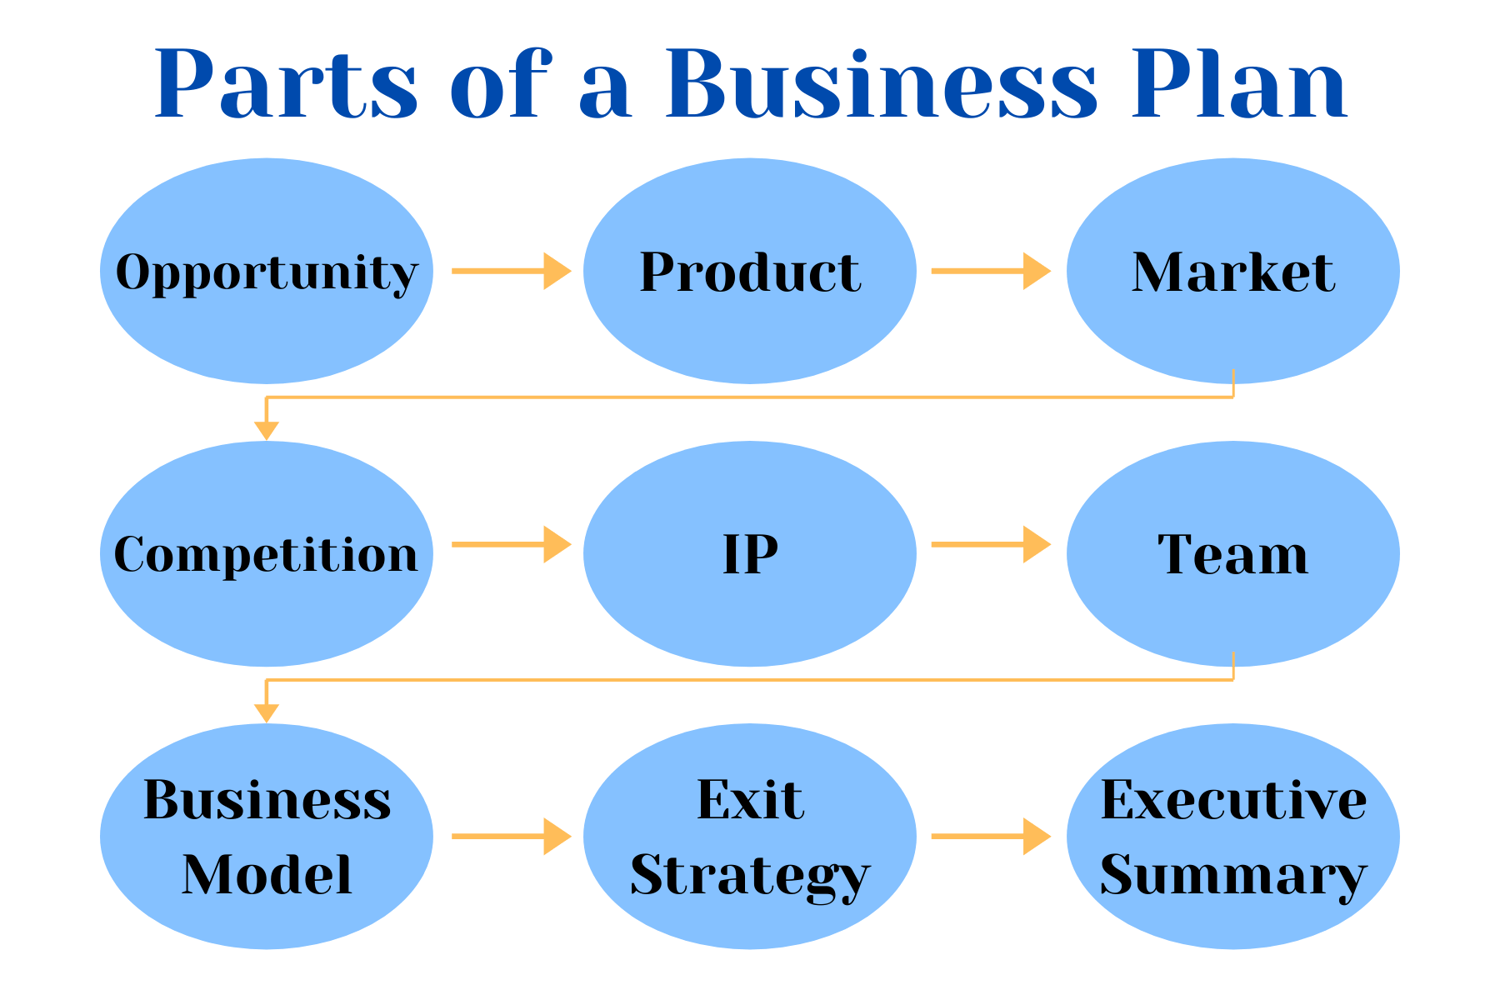 describe the components of a business plan